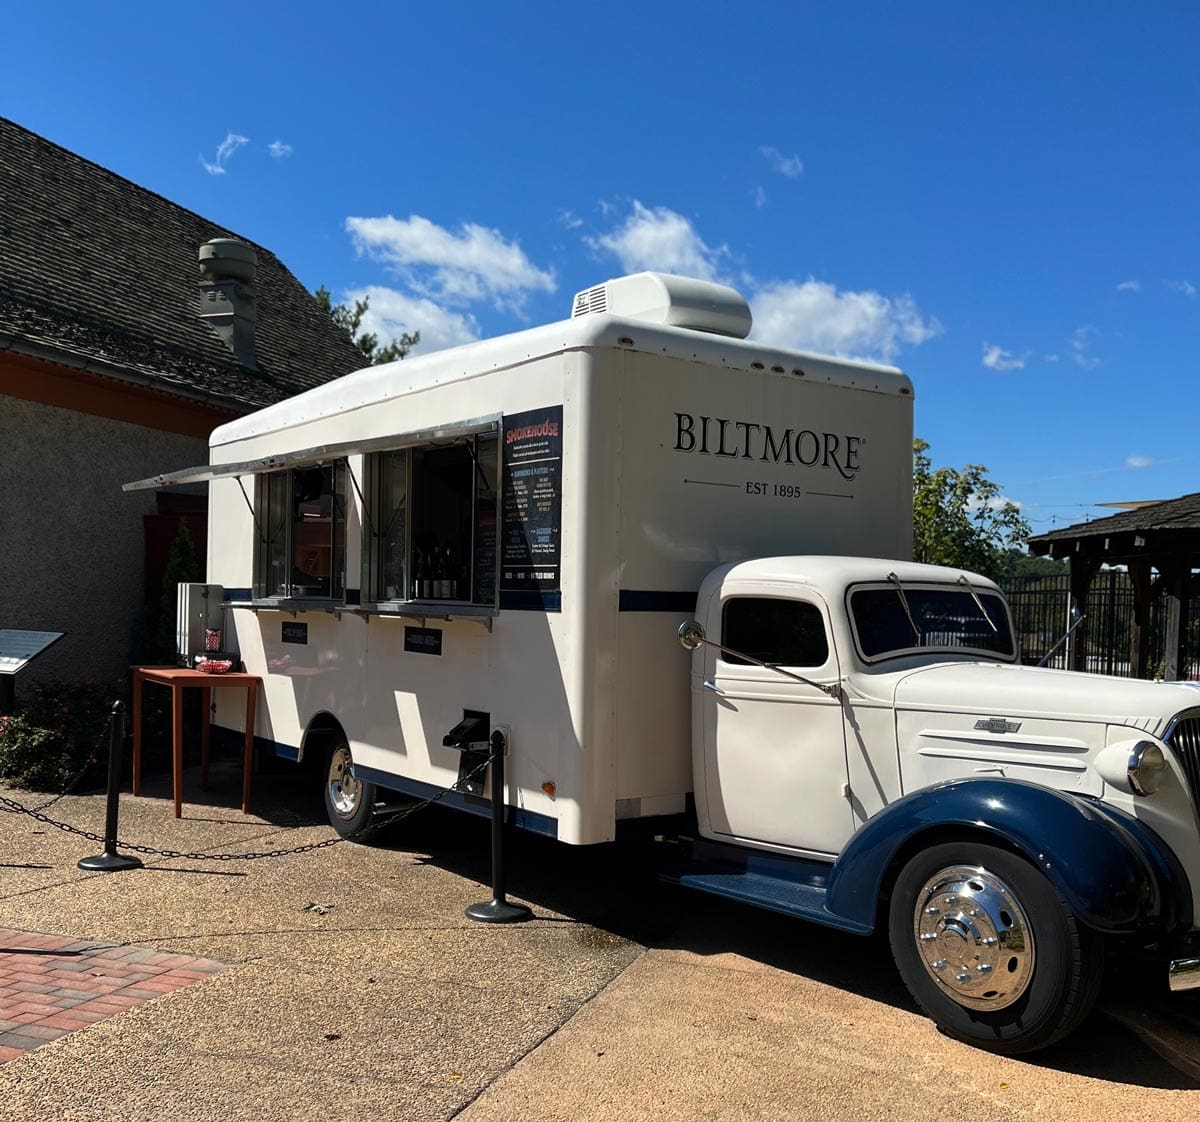 A food truck waiting for people at the Biltmore Village.